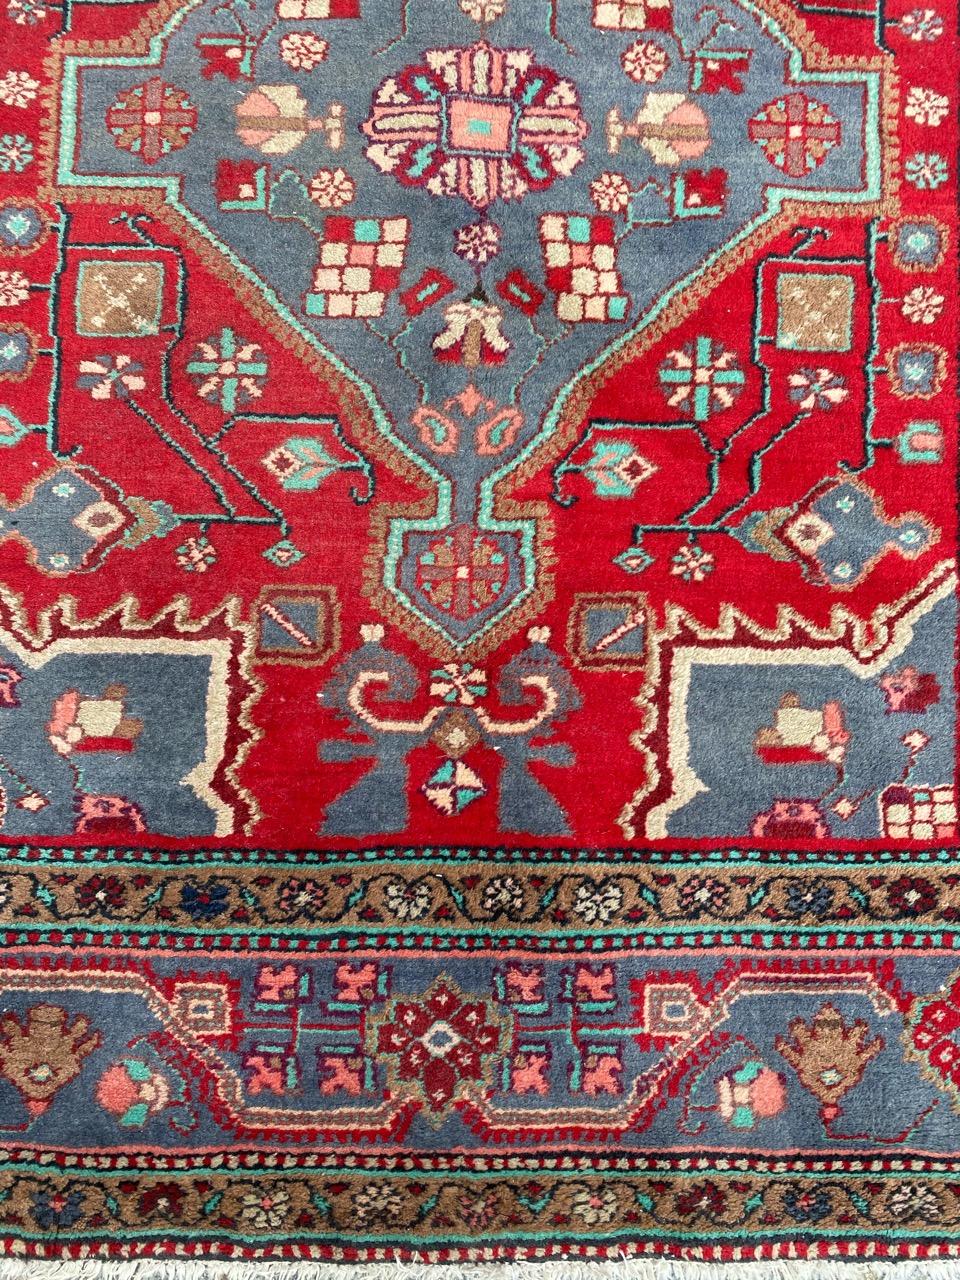 Beautiful early 20th century Malayer rug with a beautiful geometrical design and beautiful natural colors, entirely hand knotted with wool velvet on cotton foundation.

✨✨✨
